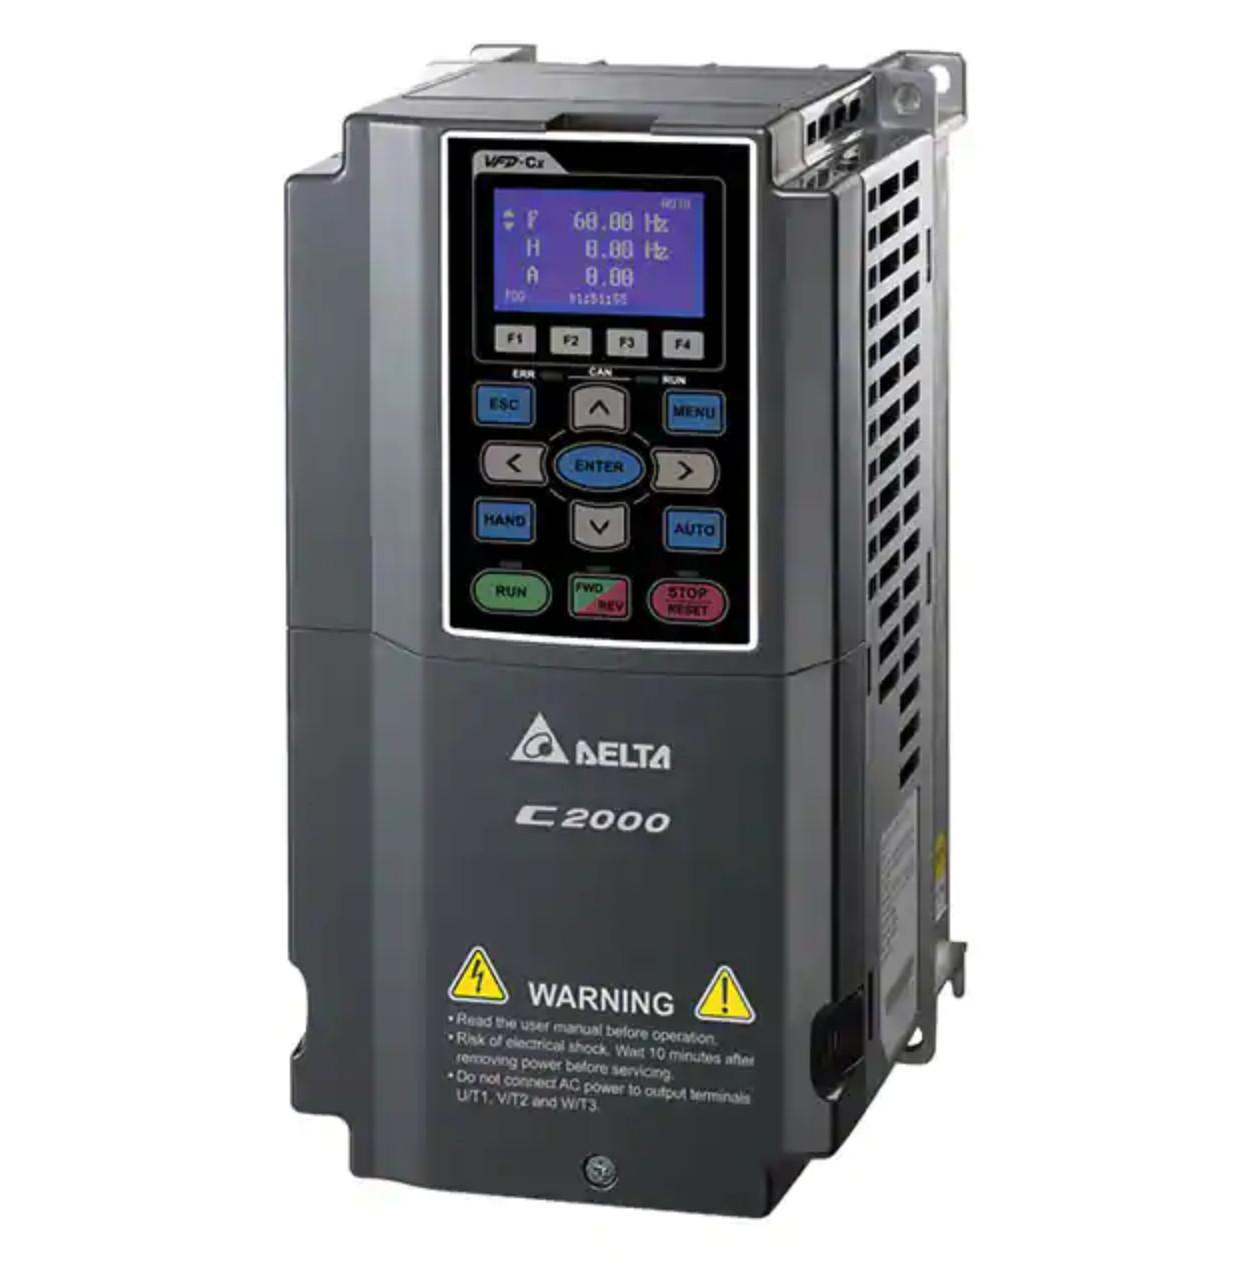 Delta VFD037C43A-21 Variable Frequency Drive, 3 phase, 460 VAC Input, 5 HP, frame A, wall mount, IP20, NEMA 1